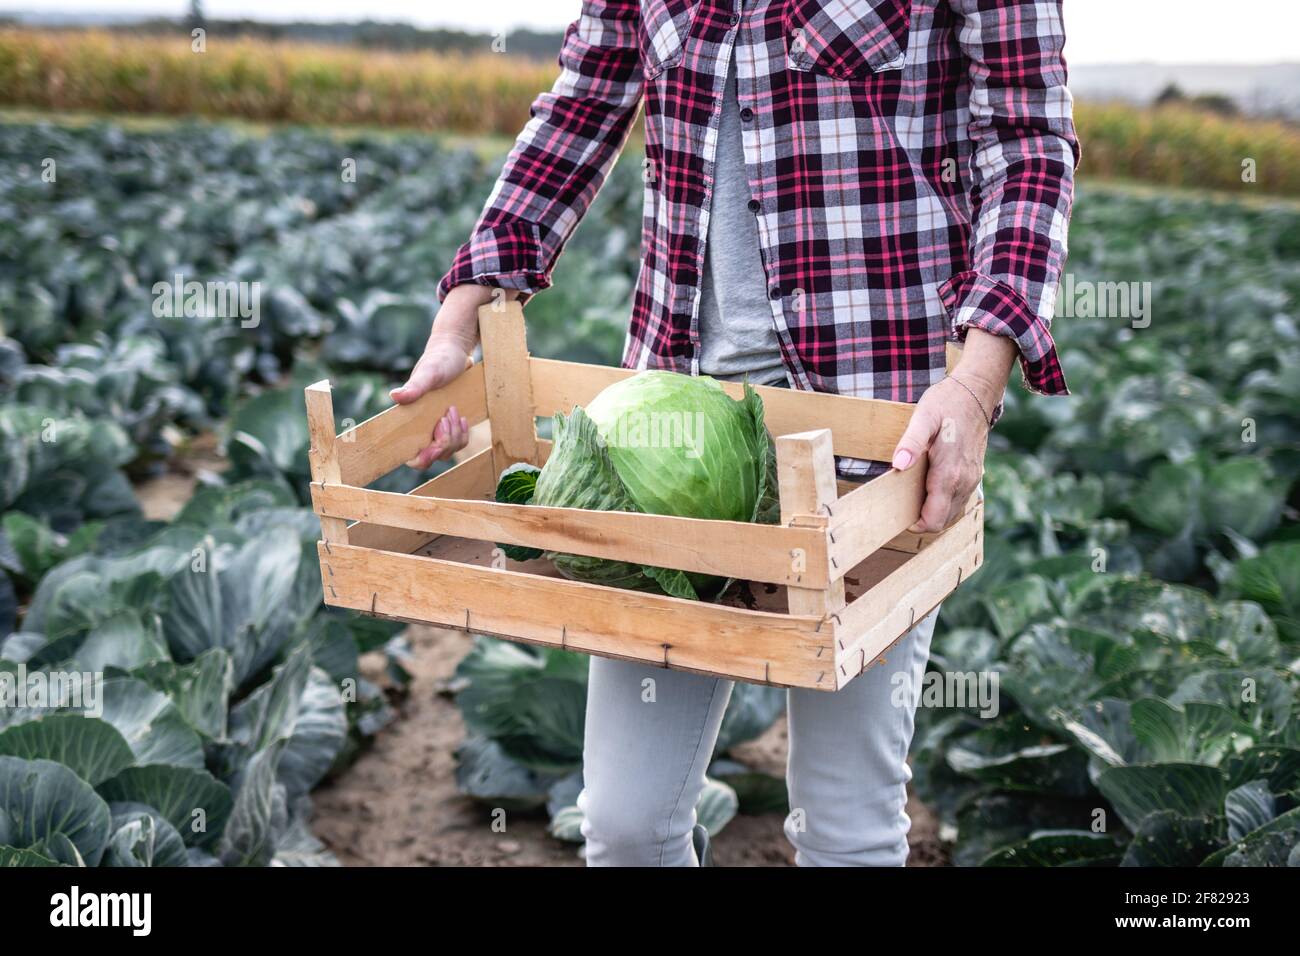 Organic farming. Woman harvesting cabbage from field. Farmer holding wooden crate with harvested leaf vegetable Stock Photo